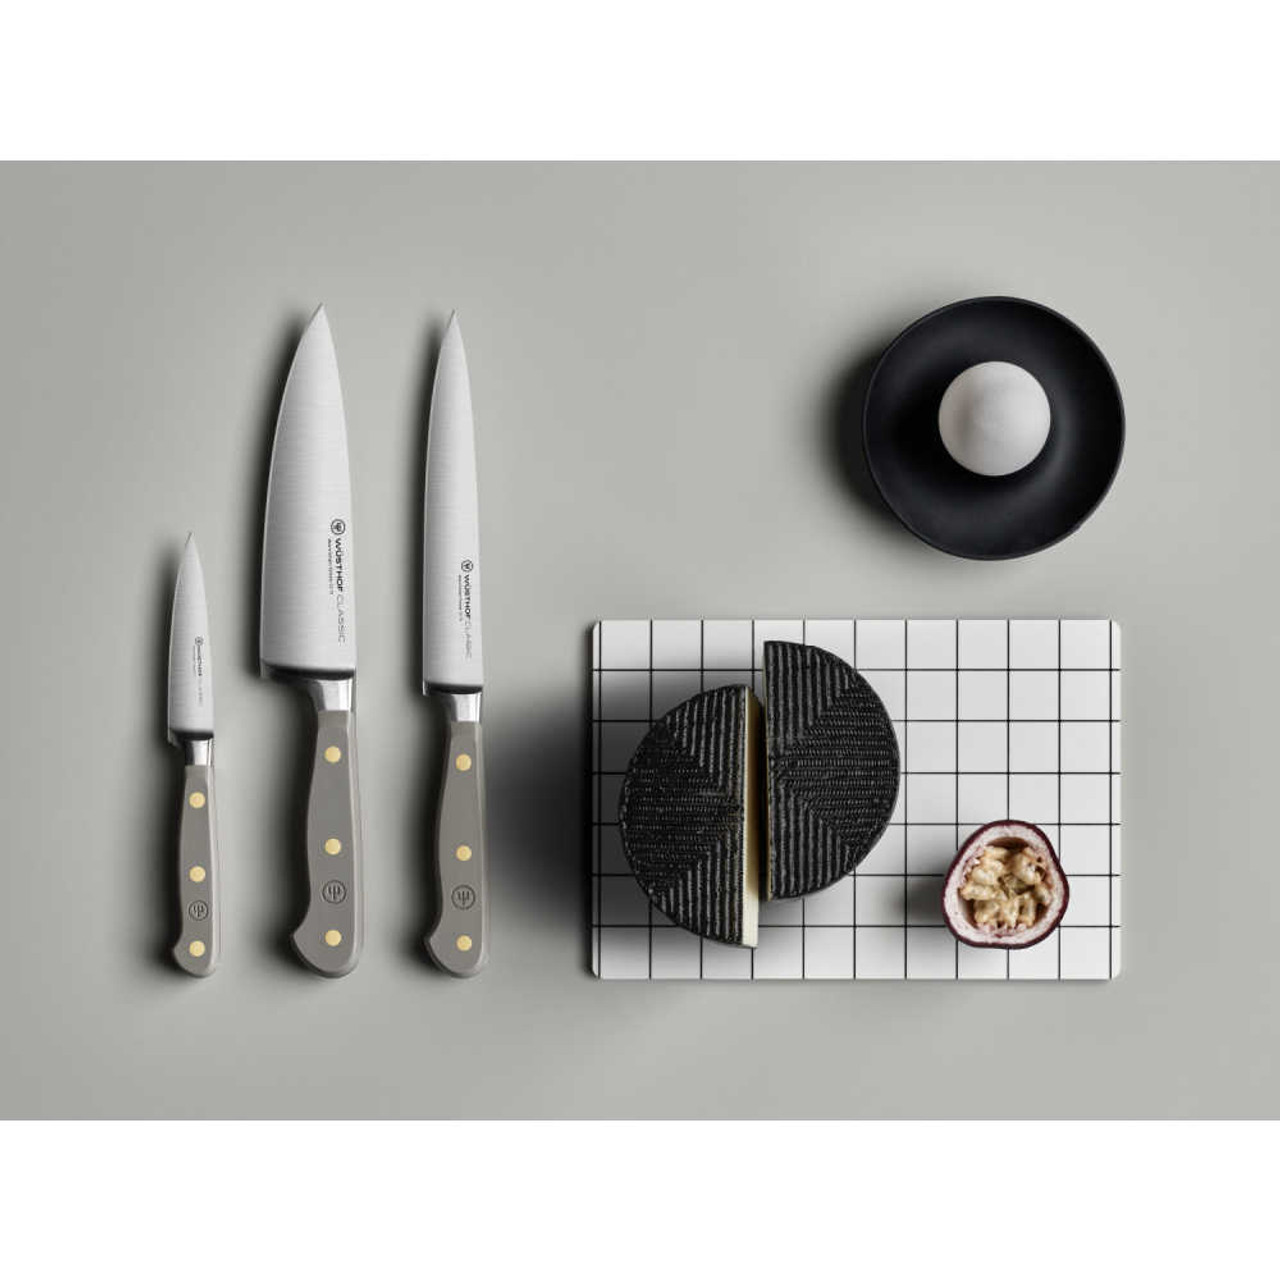 https://cdn11.bigcommerce.com/s-hccytny0od/images/stencil/1280x1280/products/5382/23493/Wusthof_Classic_Color_6-Inch_Chefs_Knife_Velvet_Oyster_1__83349.1682092414.jpg?c=2?imbypass=on